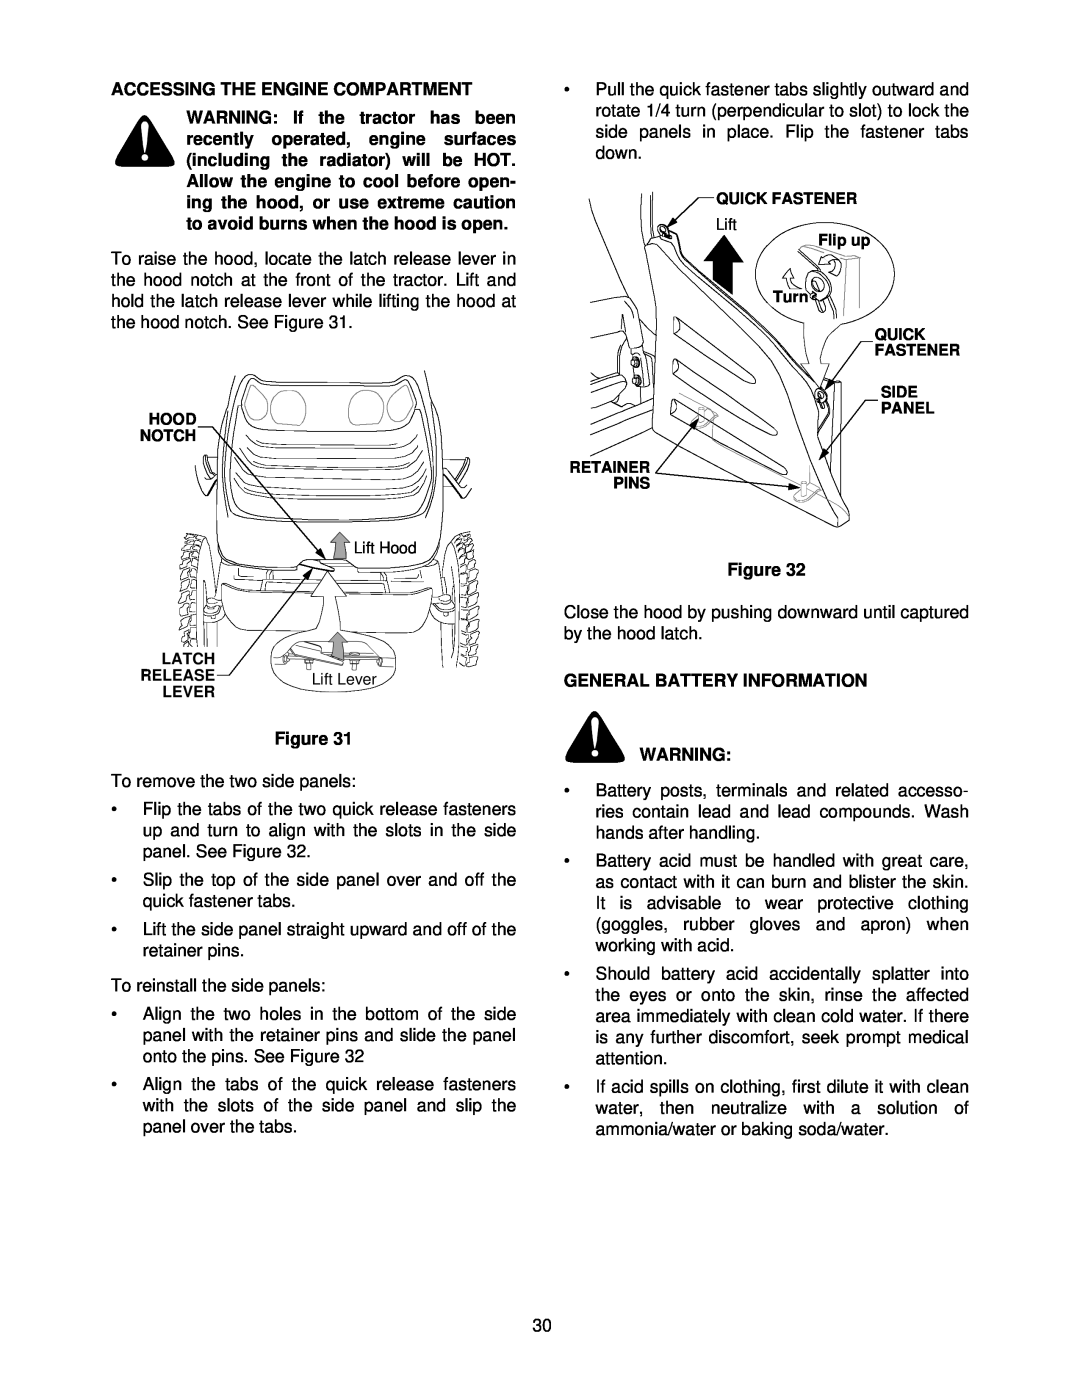 Cub Cadet 7264 manual Accessing The Engine Compartment, General Battery Information 